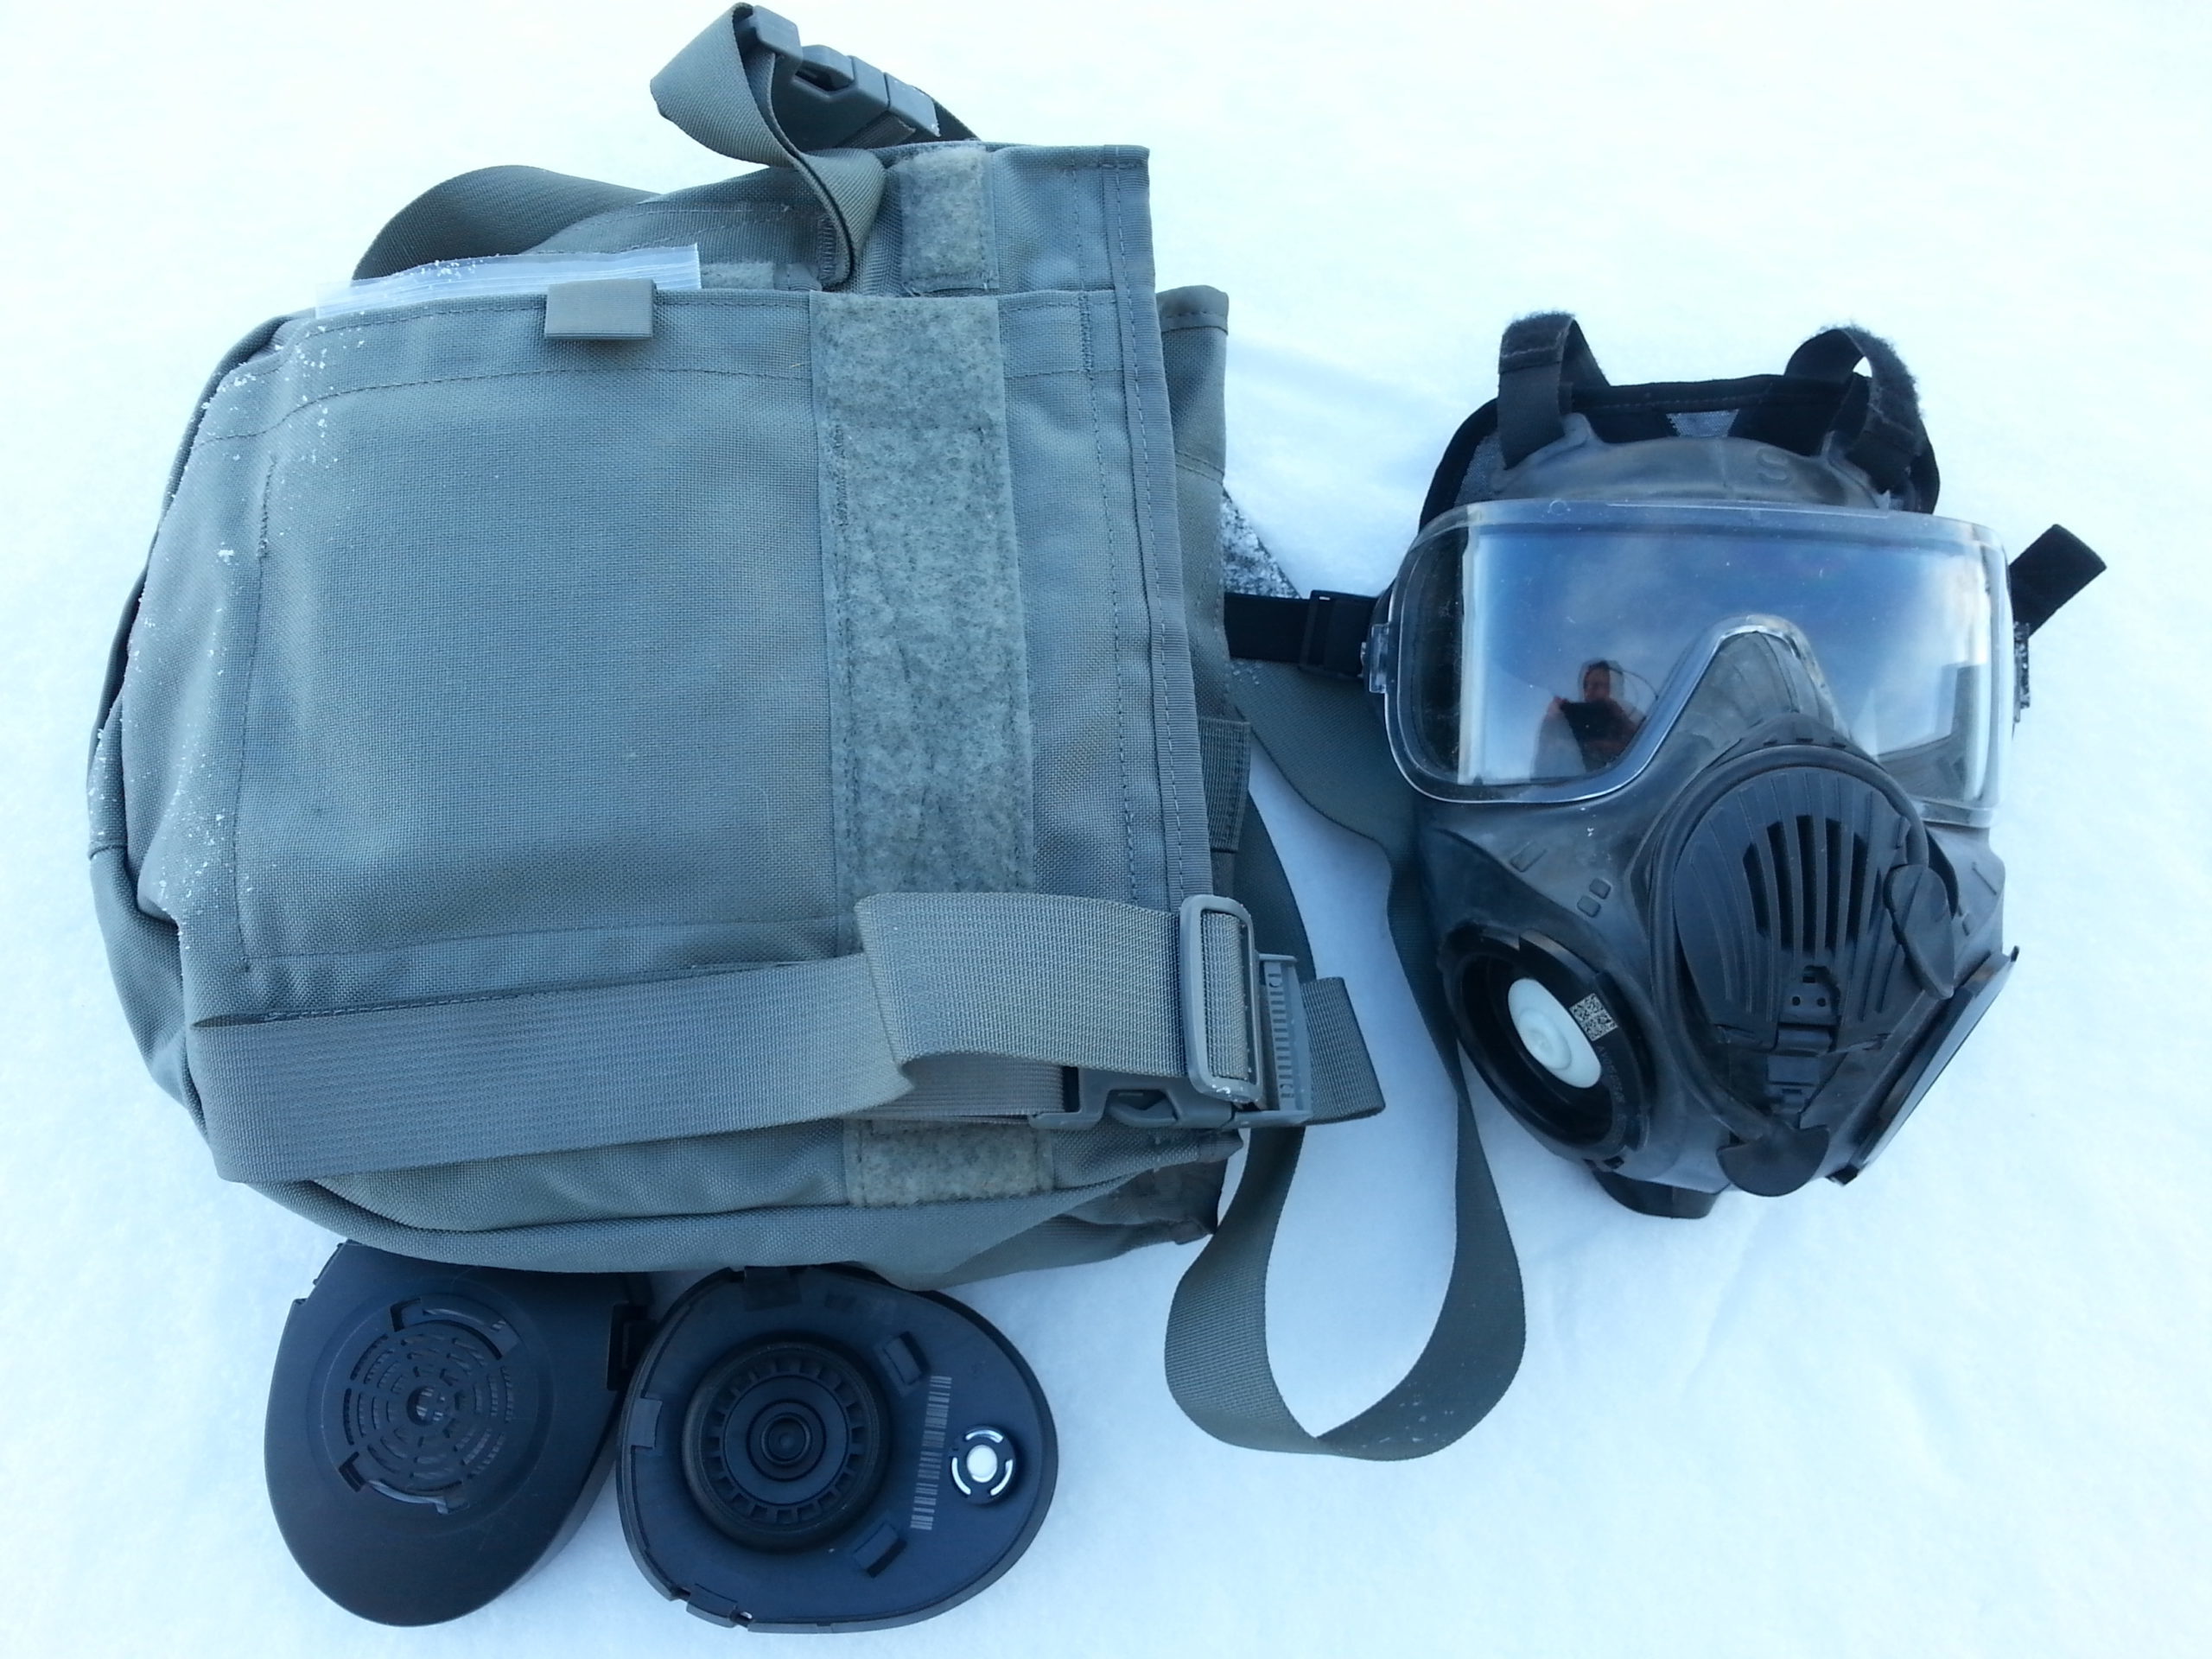 Avon M50 gas mask with filters and carry bag